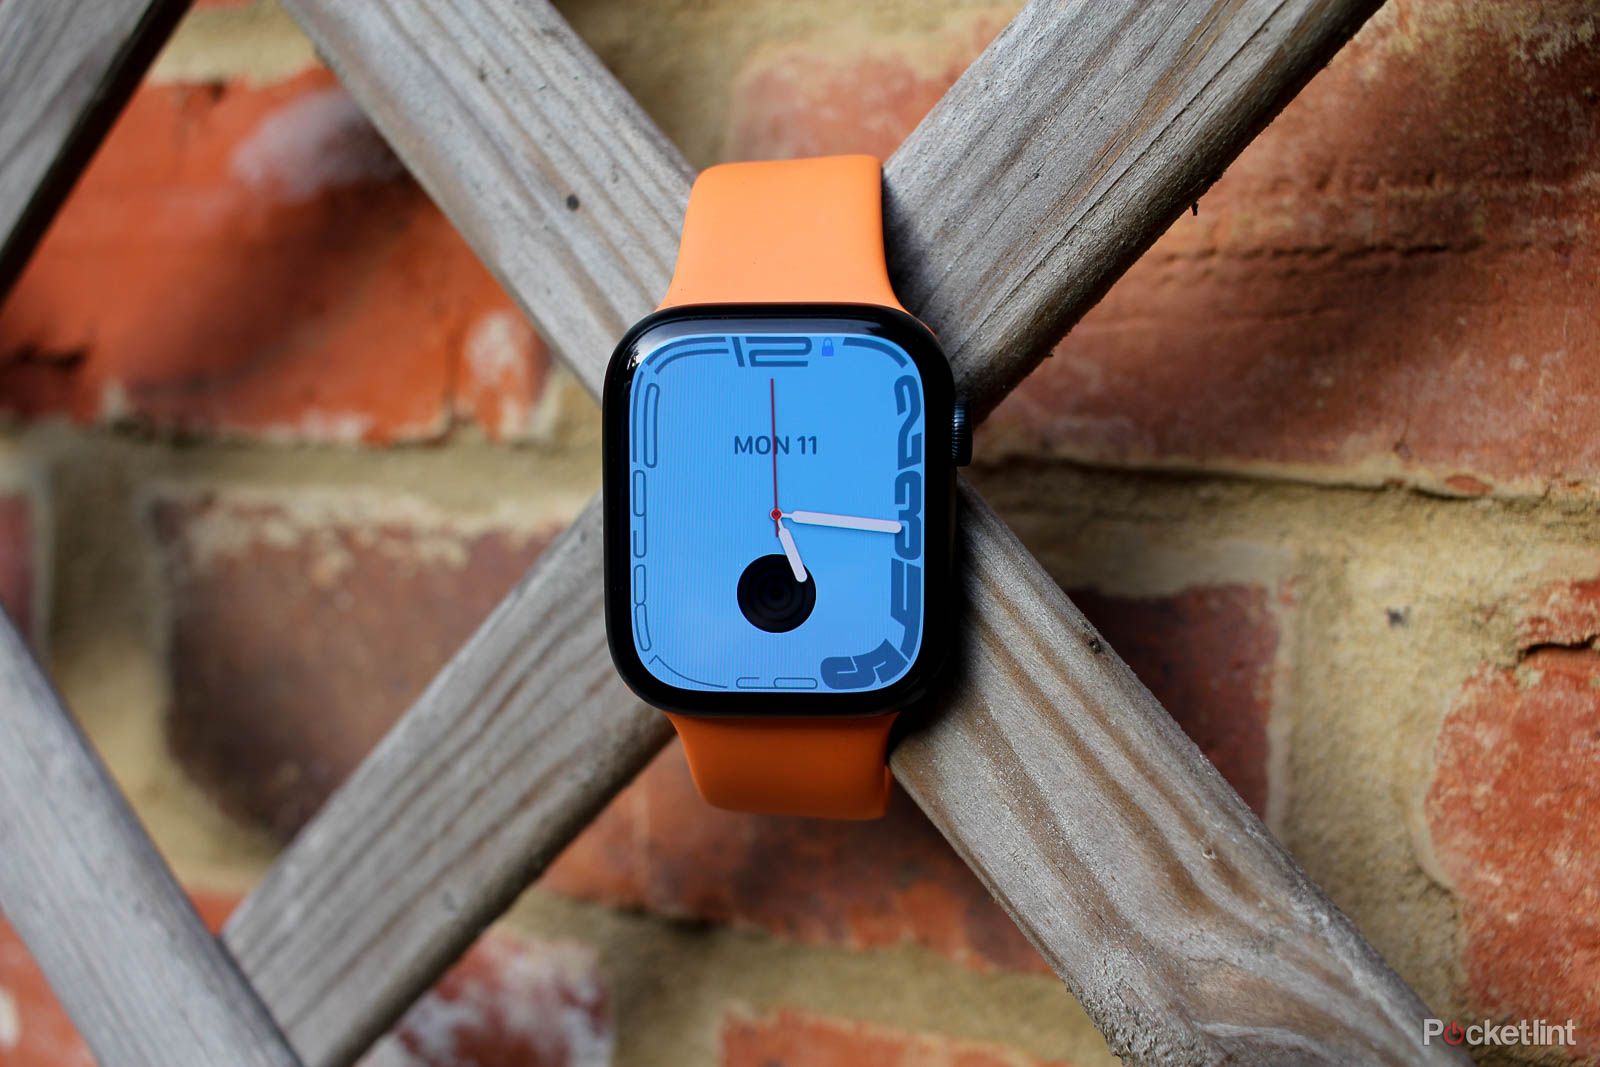 How to find your iPhone quickly with your Apple Watch